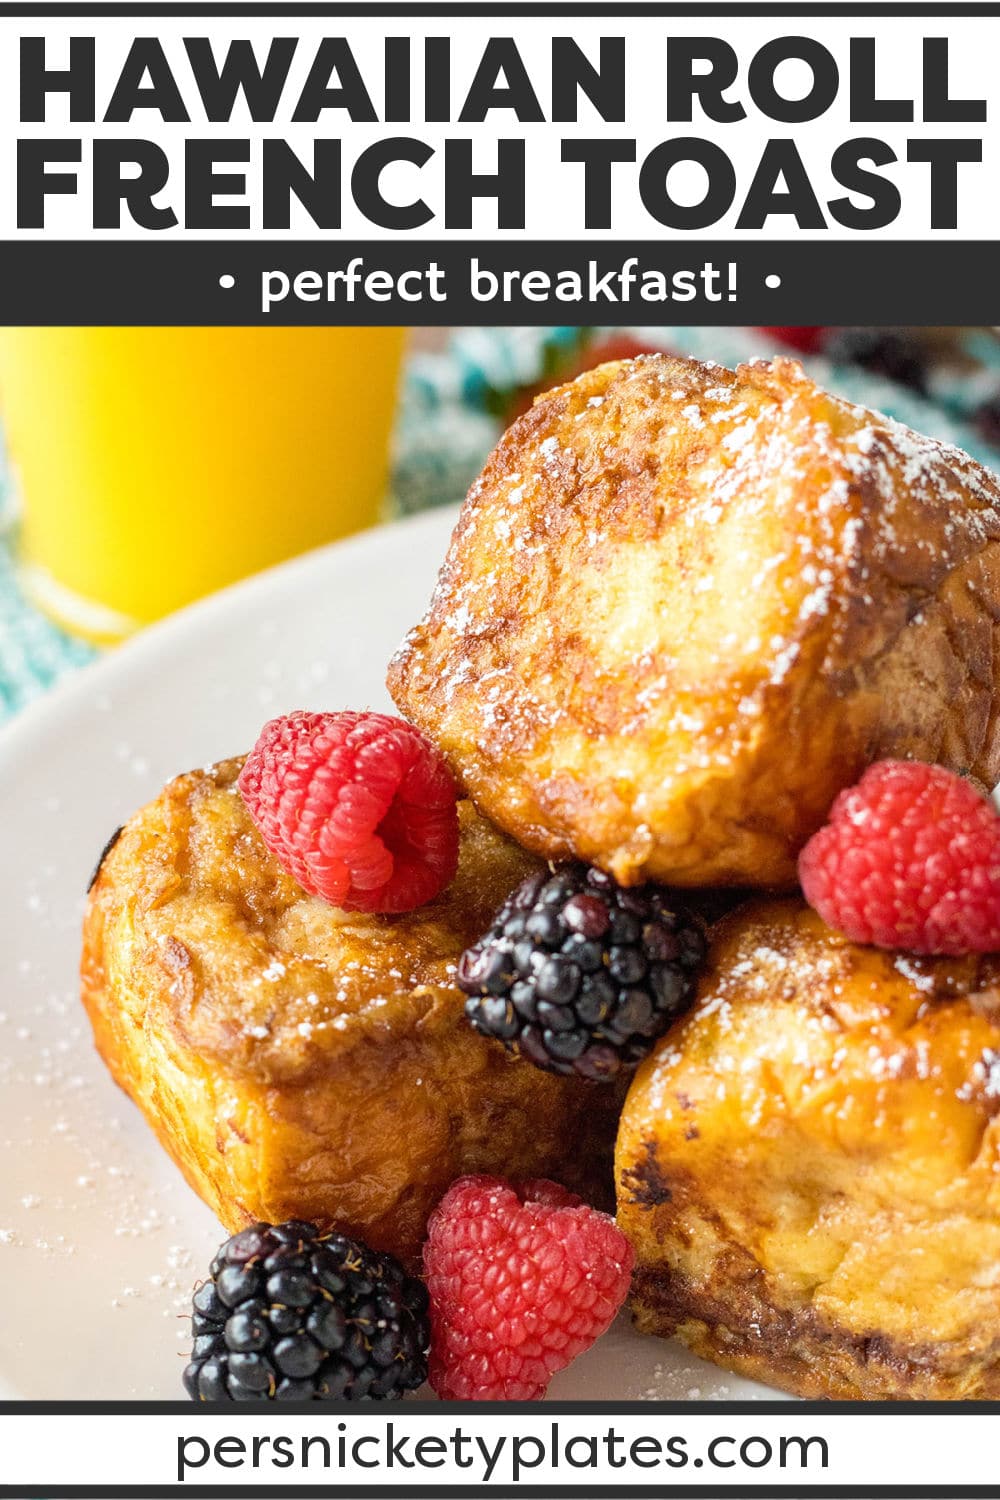 Hawaiian Rolls French Toast is made by soaking sweet hawaiian bread in an egg mixture and then cooking it up until golden brown on all sides. Sprinkled with powdered sugar and paired with fresh berries before serving, this easy breakfast recipe is perfect for brunch, the weekend, or special occasions. | www.persnicketyplates.com